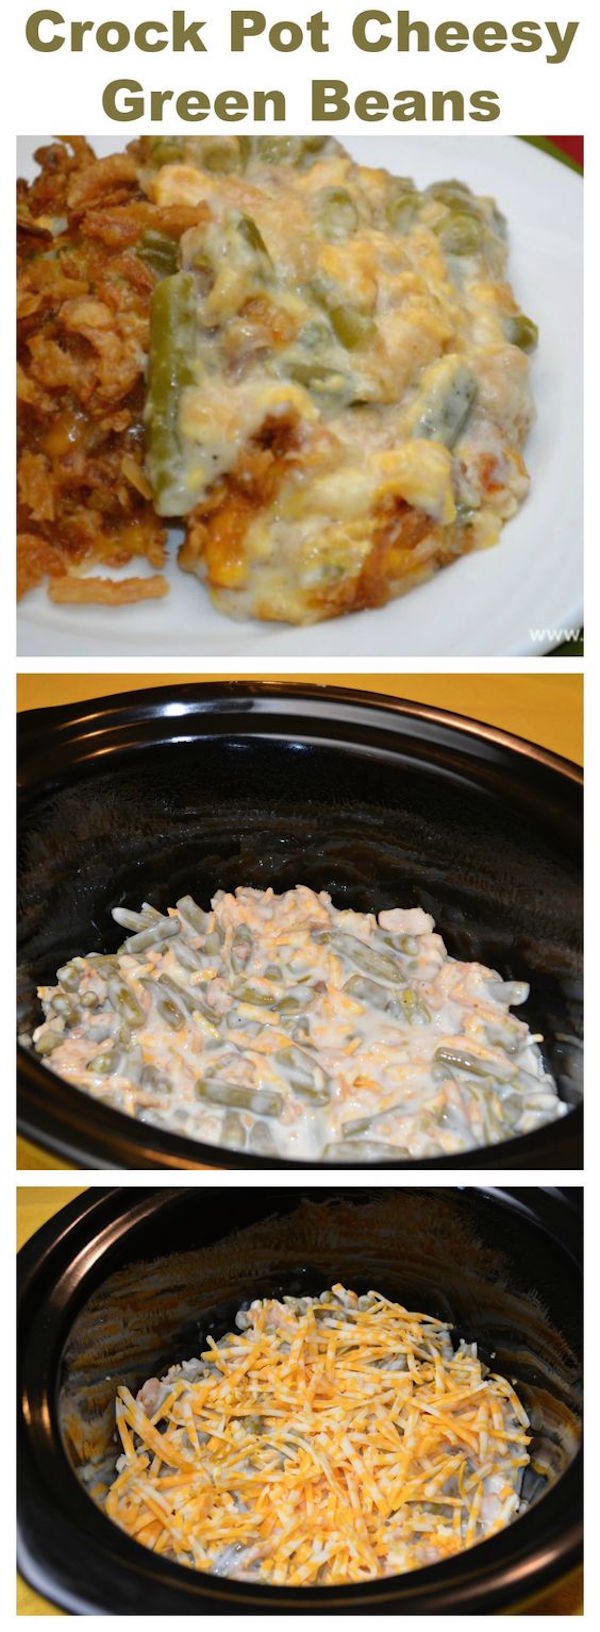 How do you make my Green Beans even better without using my oven? Use my slow cooker, plenty of cheese and make this Crock Pot Cheesy Green Bean recipe. 